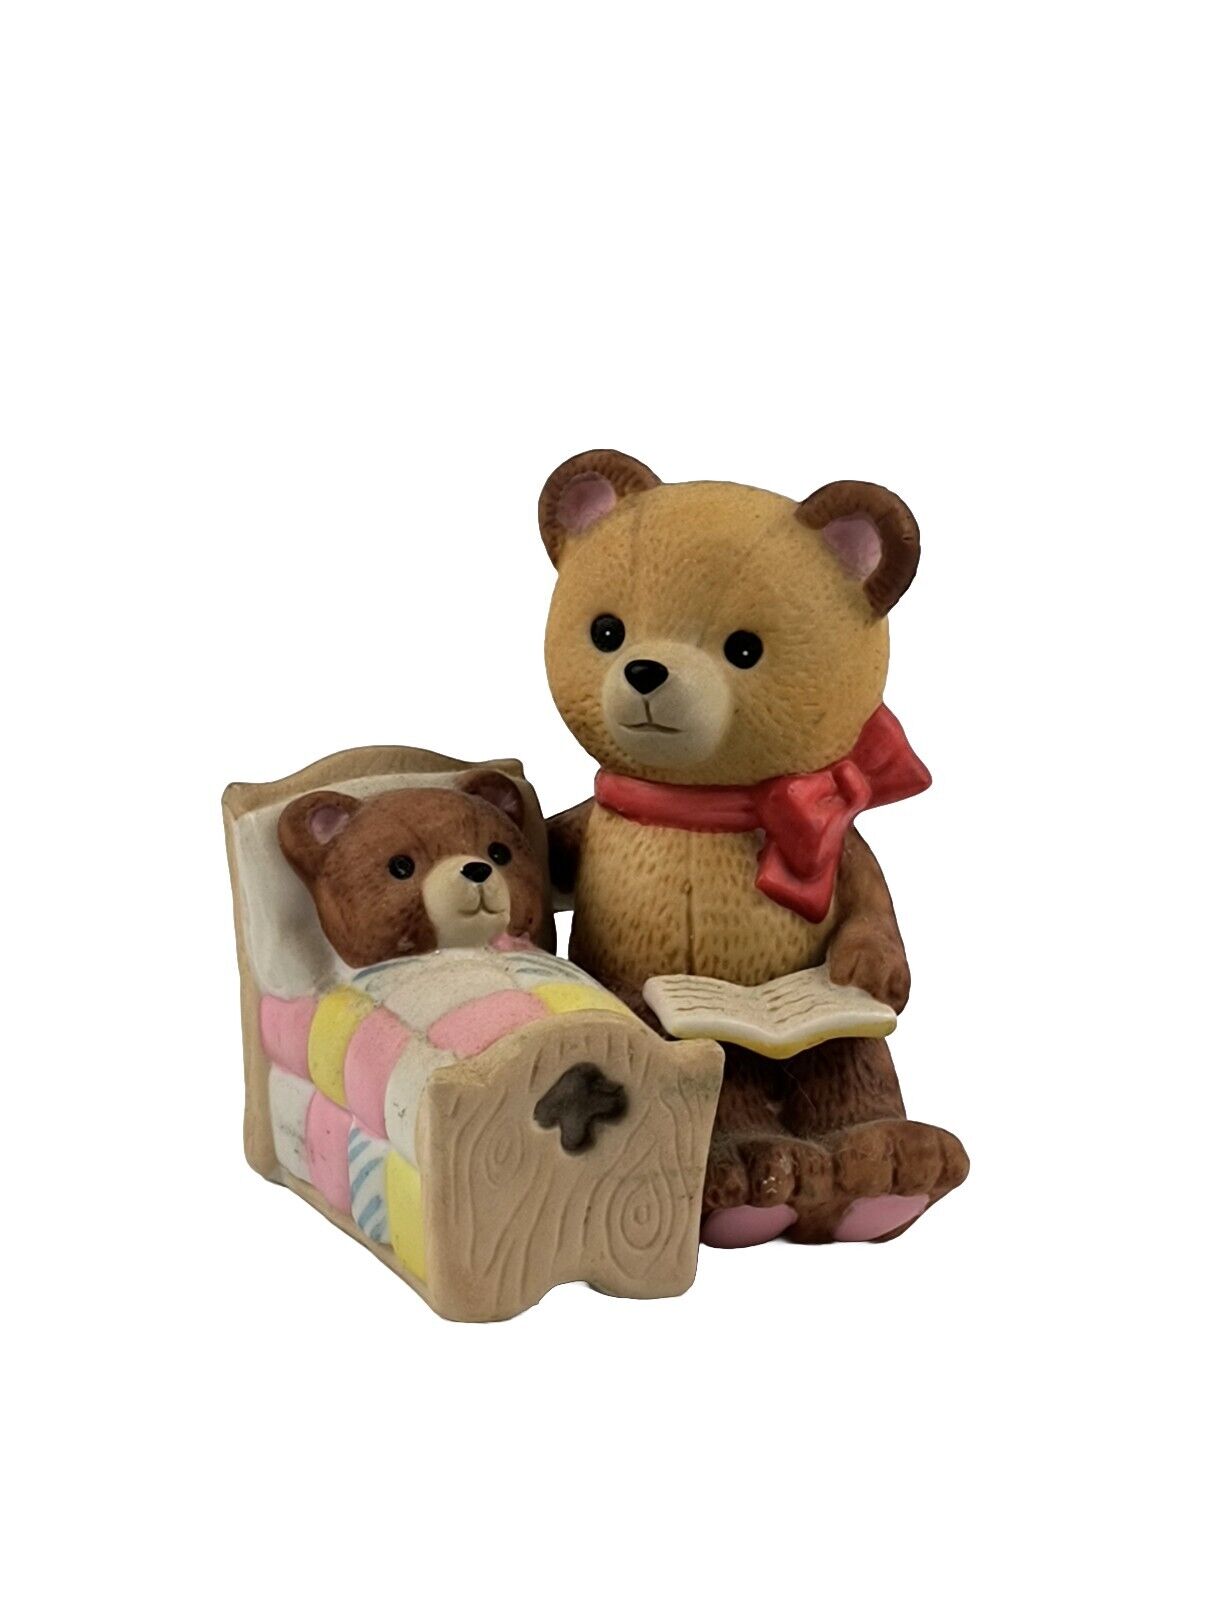 Vintage 1983 Wallace & Berrie Party Bears Story Time Ceramic Figurine